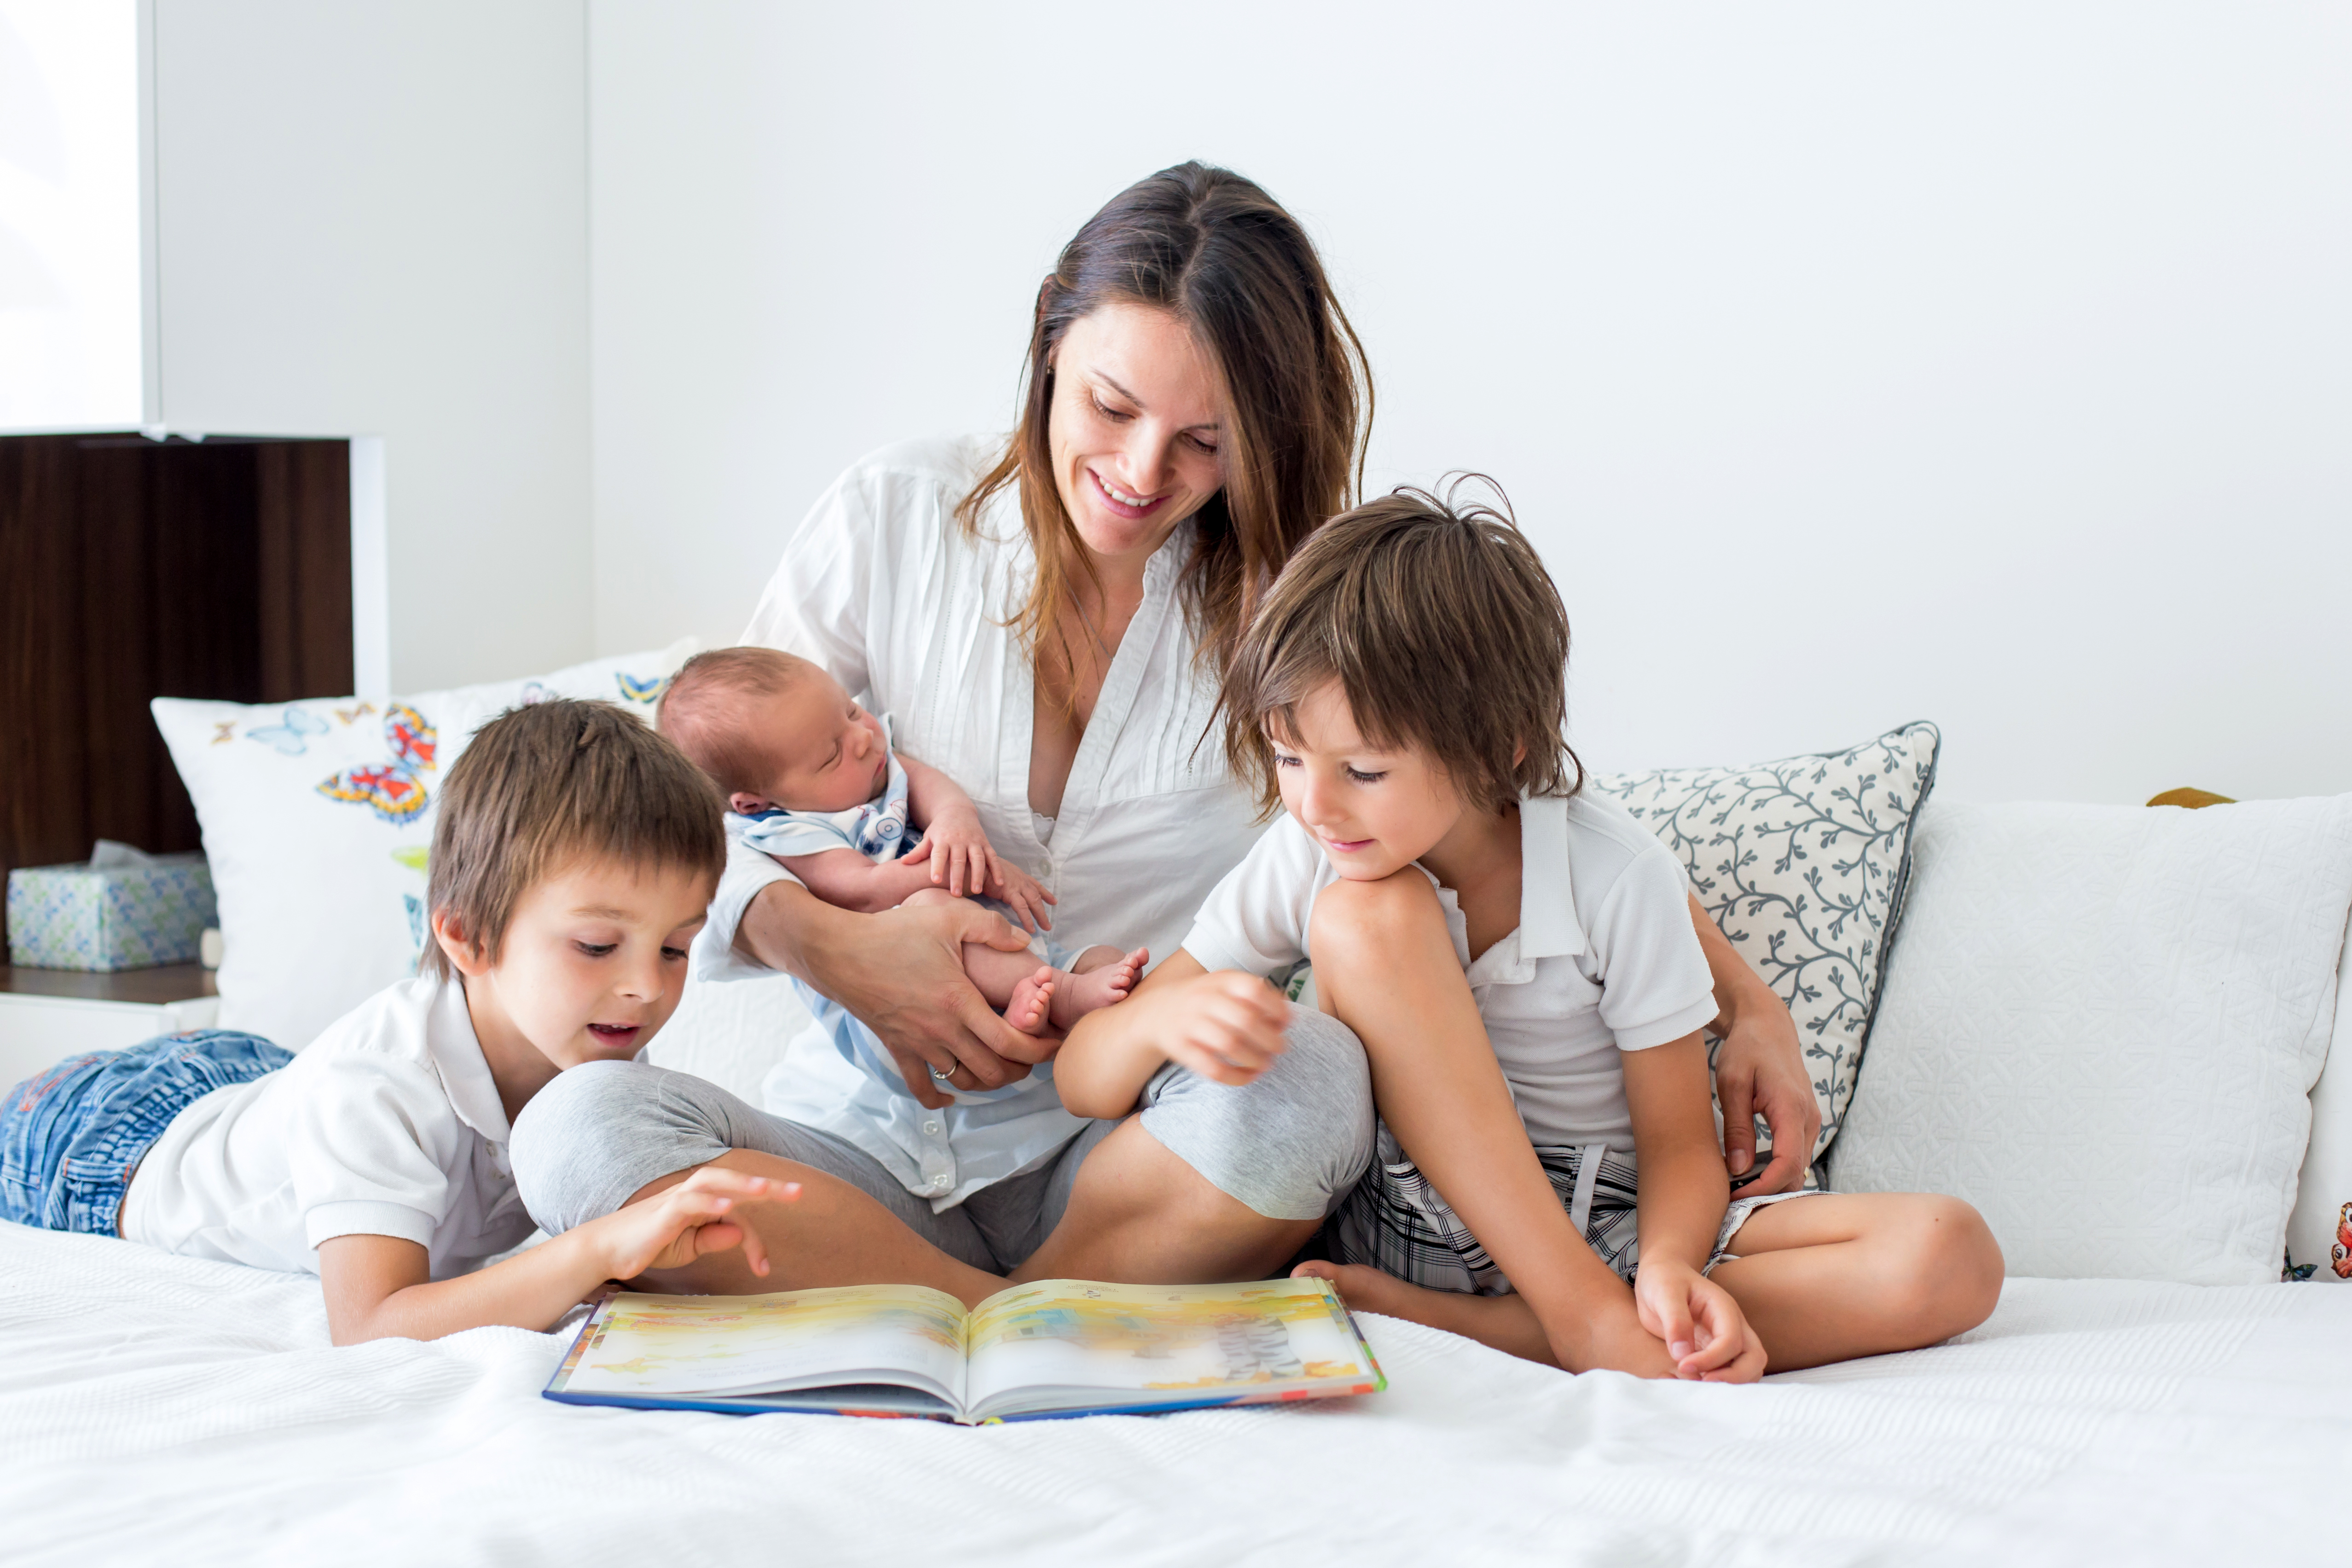 A young mother reading a book to her three kids | Source: Shutterstock